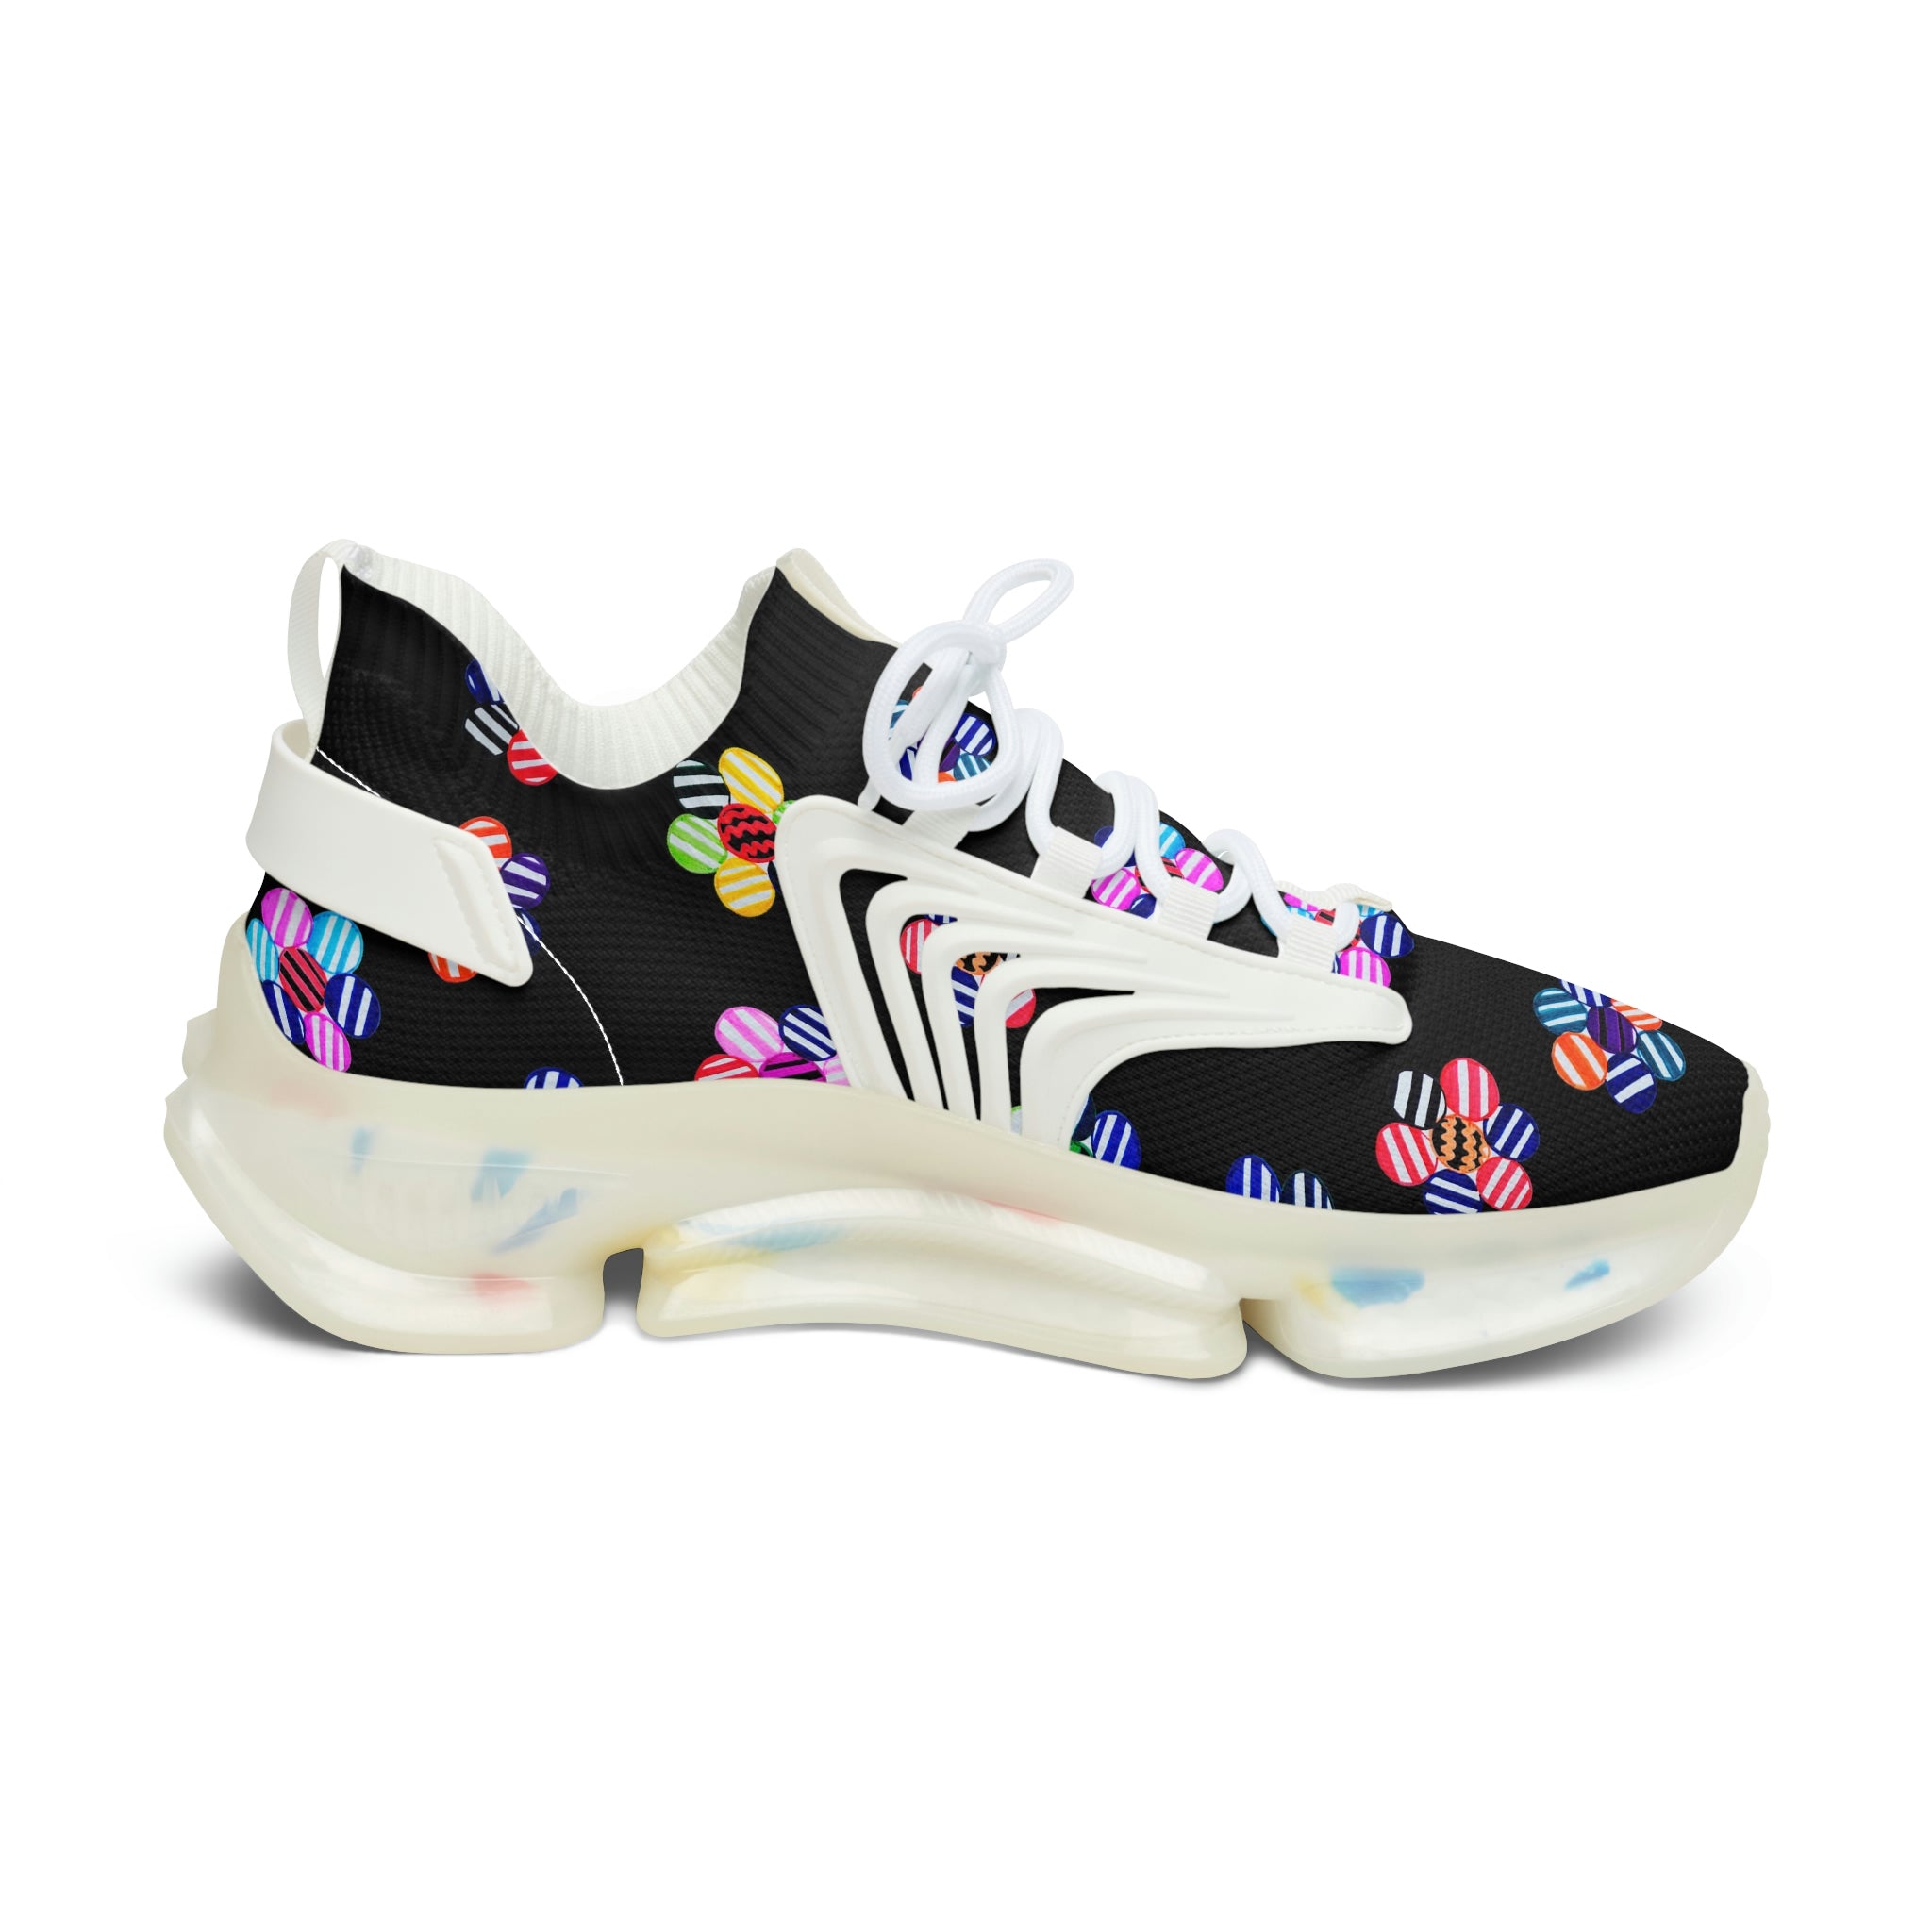 Black Candy Floral Printed OTT Women's Mesh Knit Sneakers